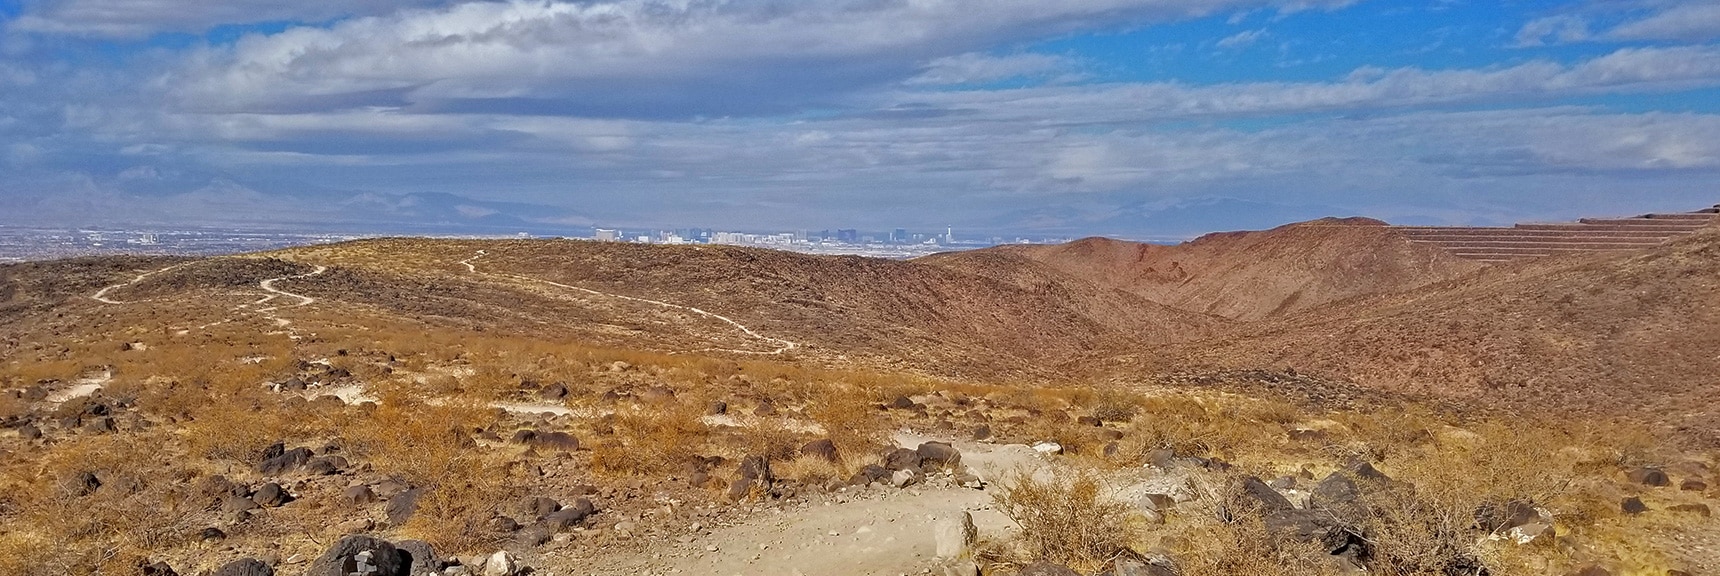 Network of Trails in the Hills Above Anthem and the Las Vegas Valley | McCullough Hills Trail in Sloan Canyon National Conservation Area, Nevada